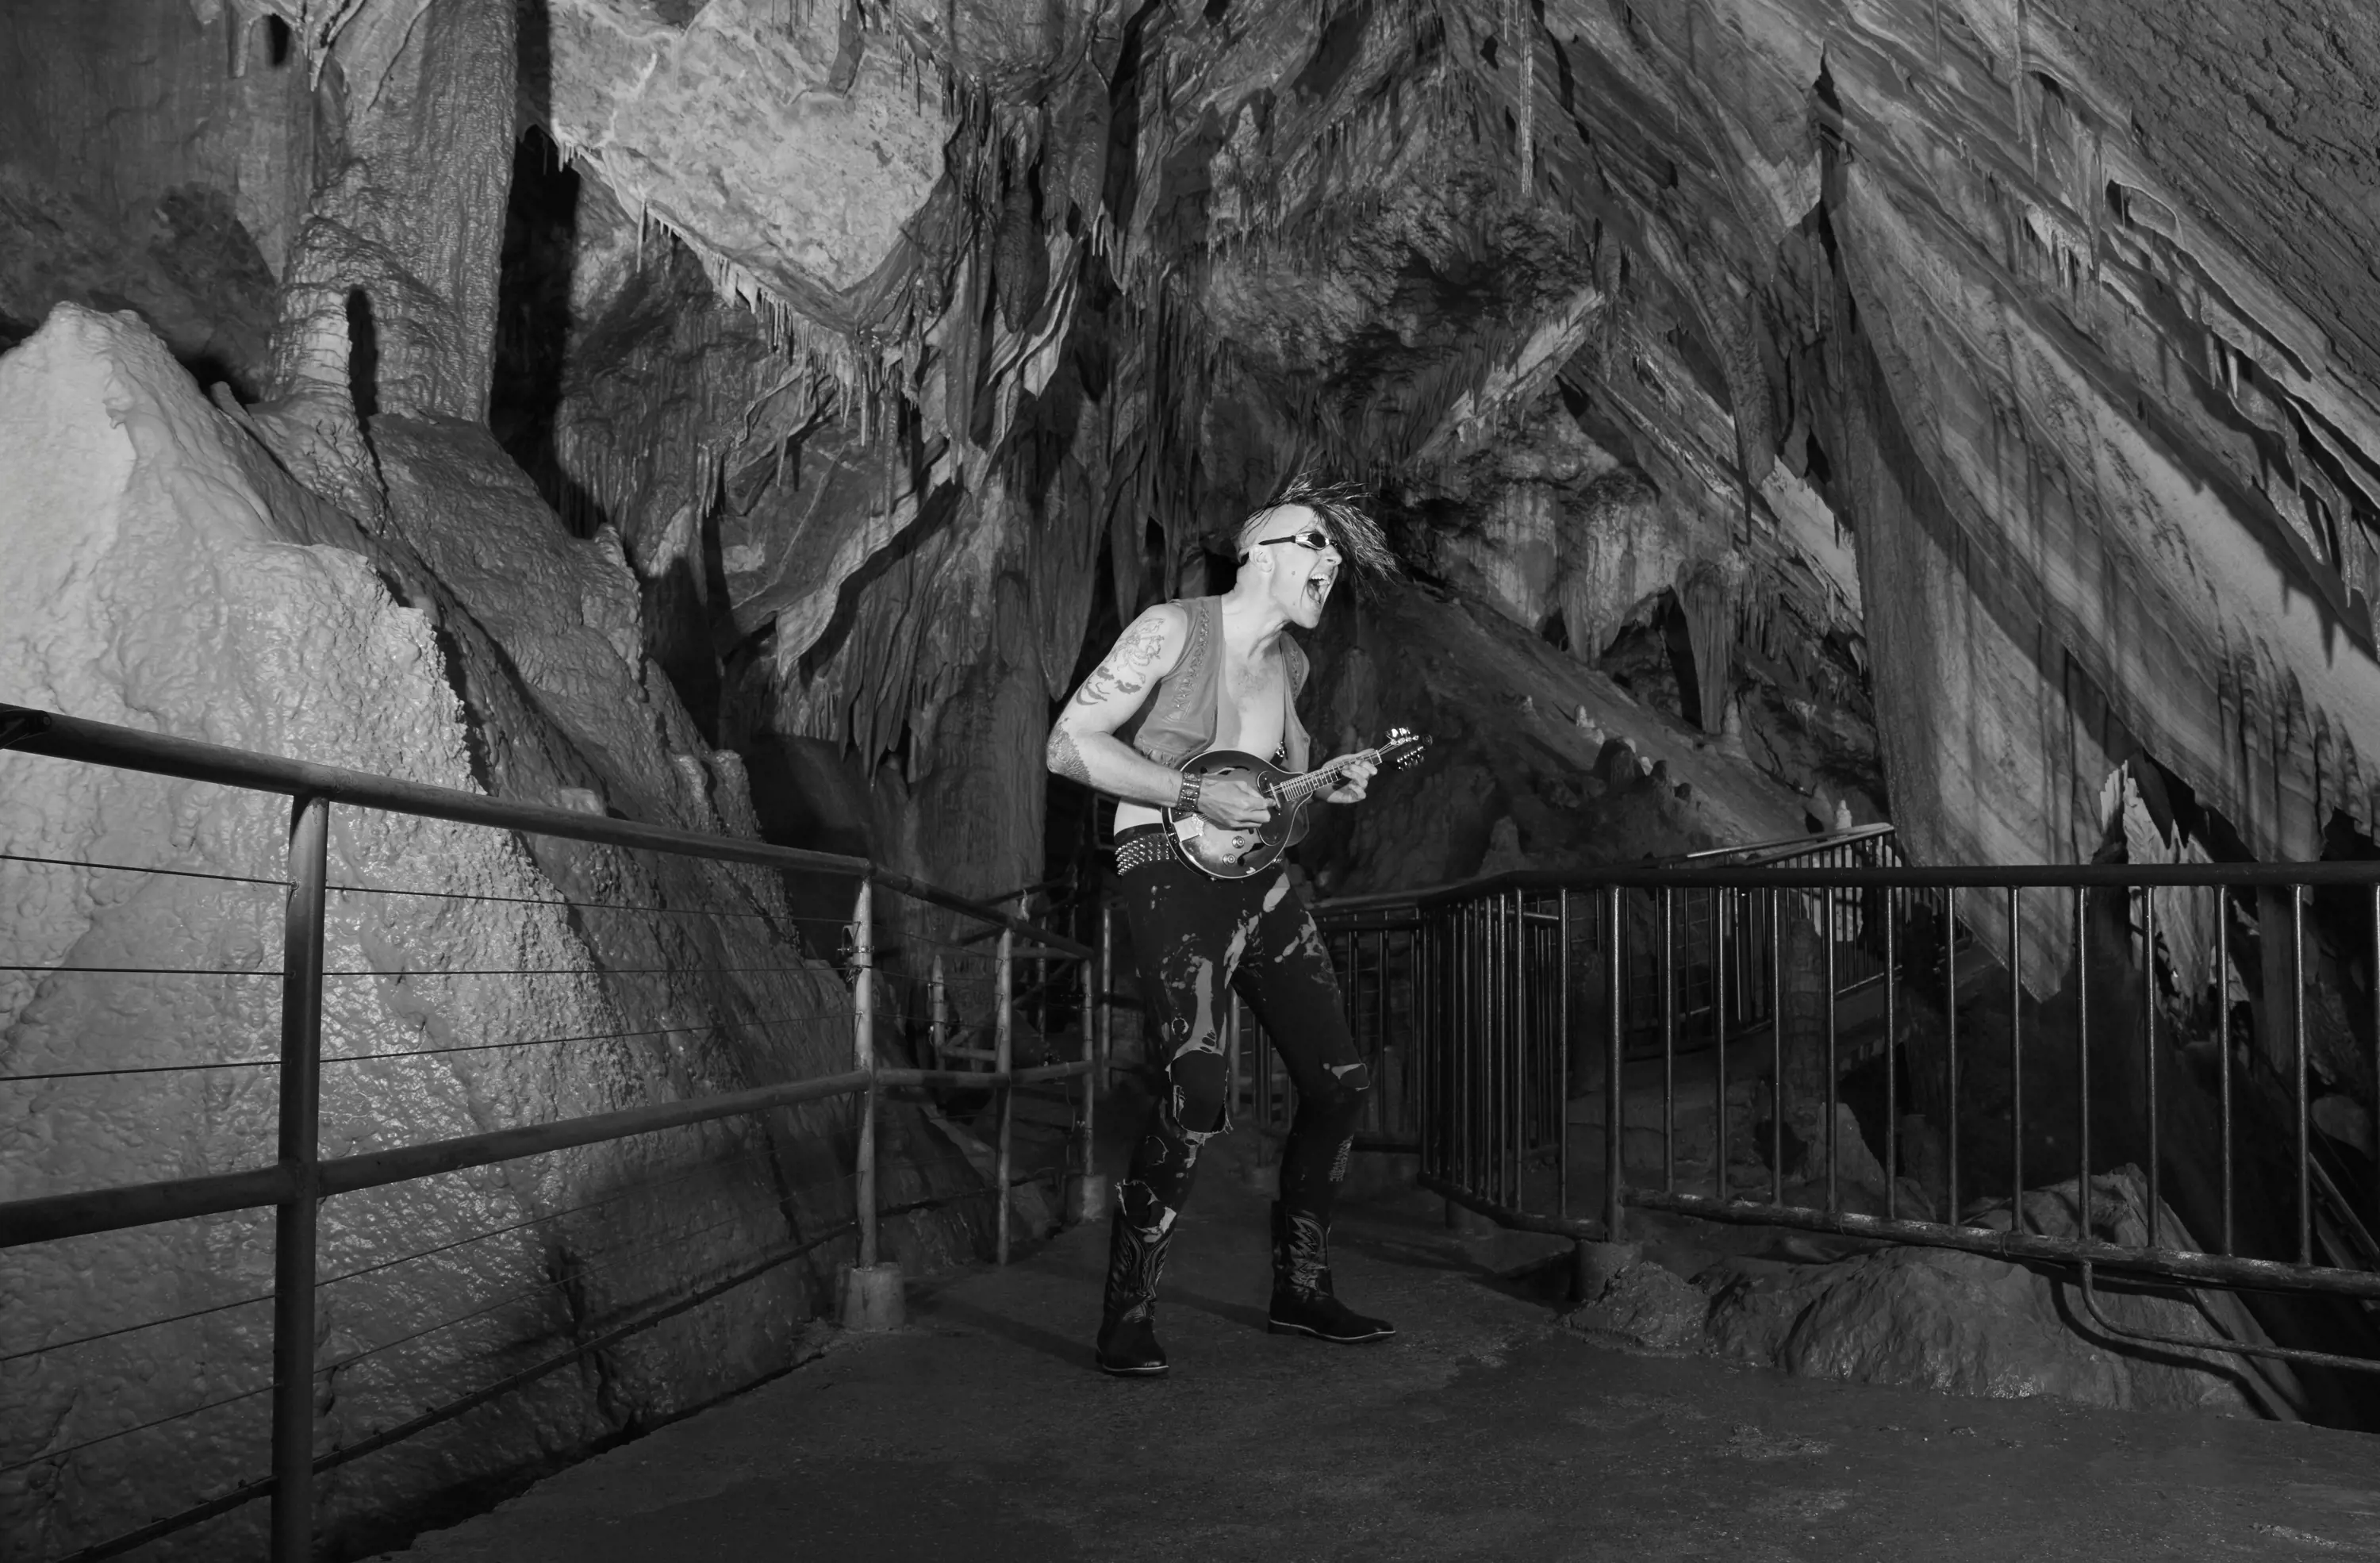 A man with tattoos and a mohawk wearing a vest and torn jeans, plays a banjo and sings on a walkway inside an enormous cave.  